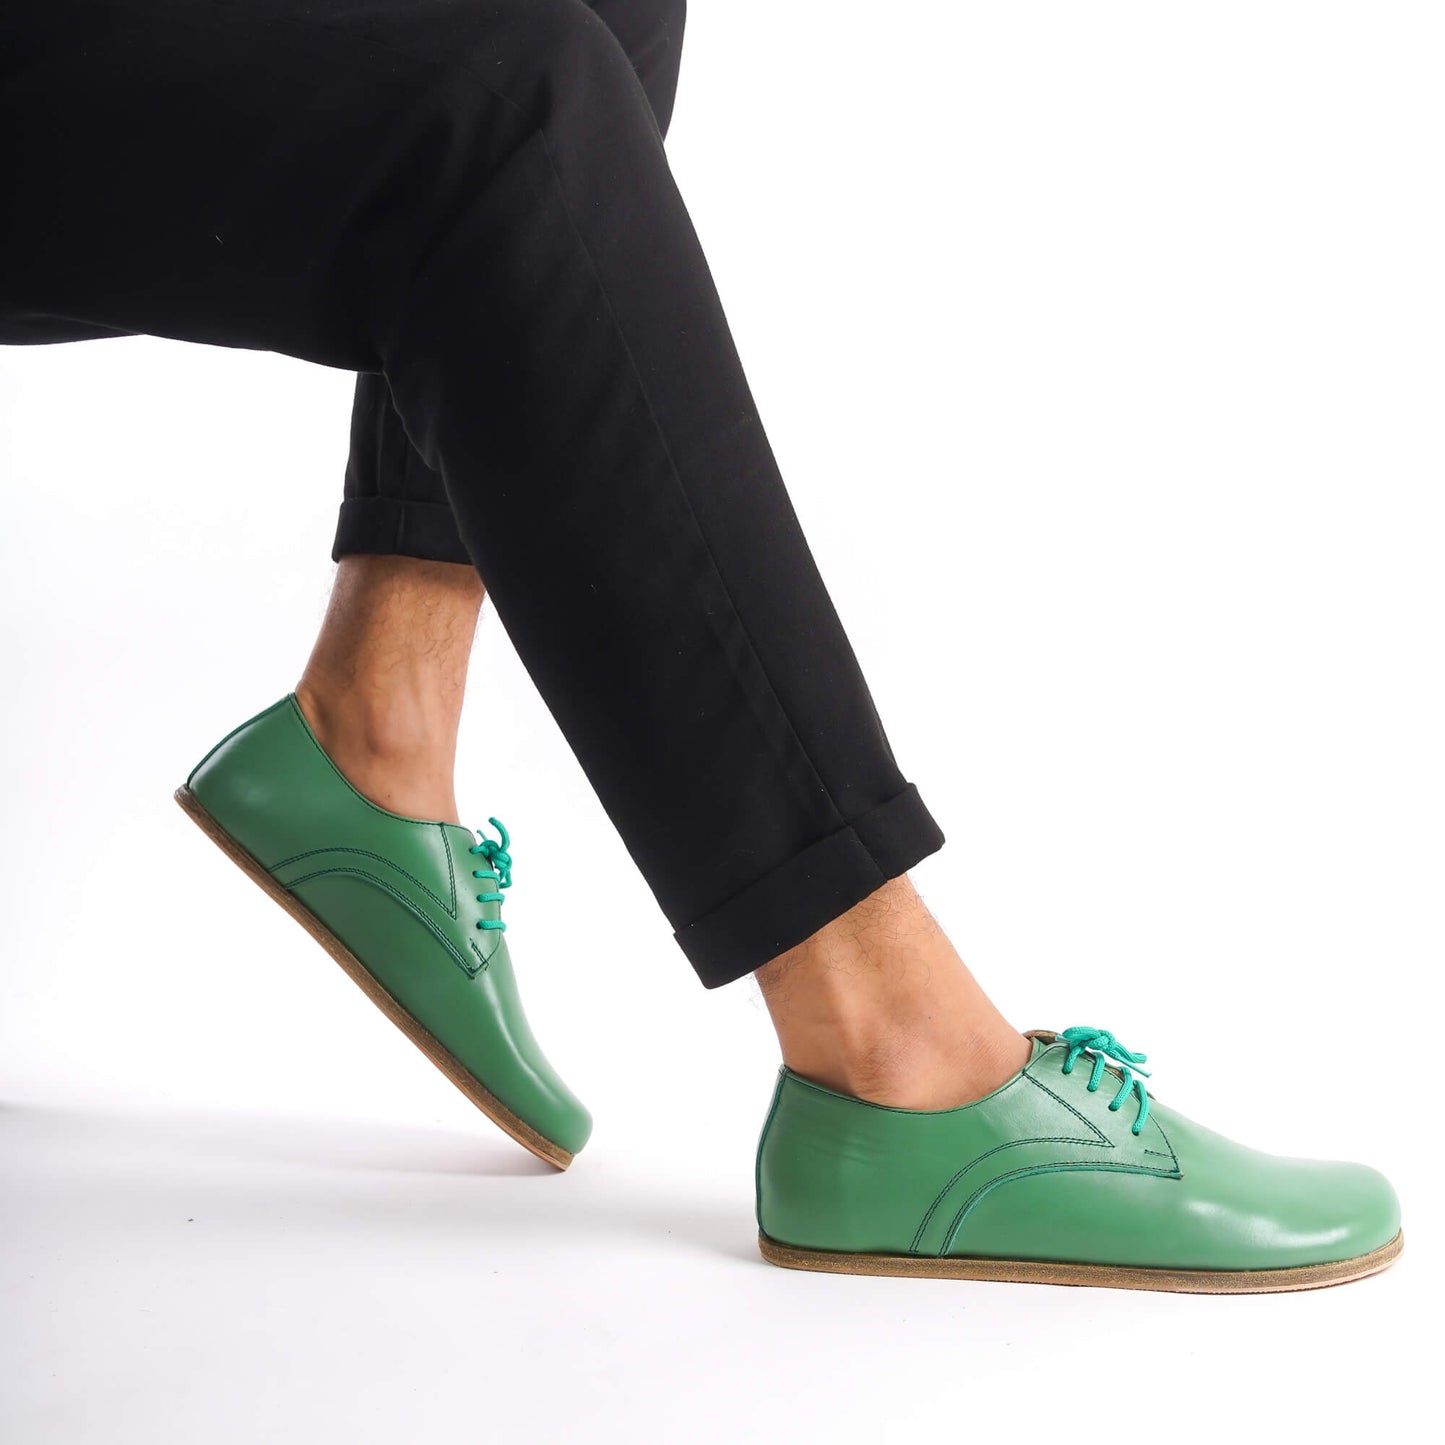 Close-up of Locris Leather Barefoot Men's Oxfords in green, featuring genuine leather and minimalist design.